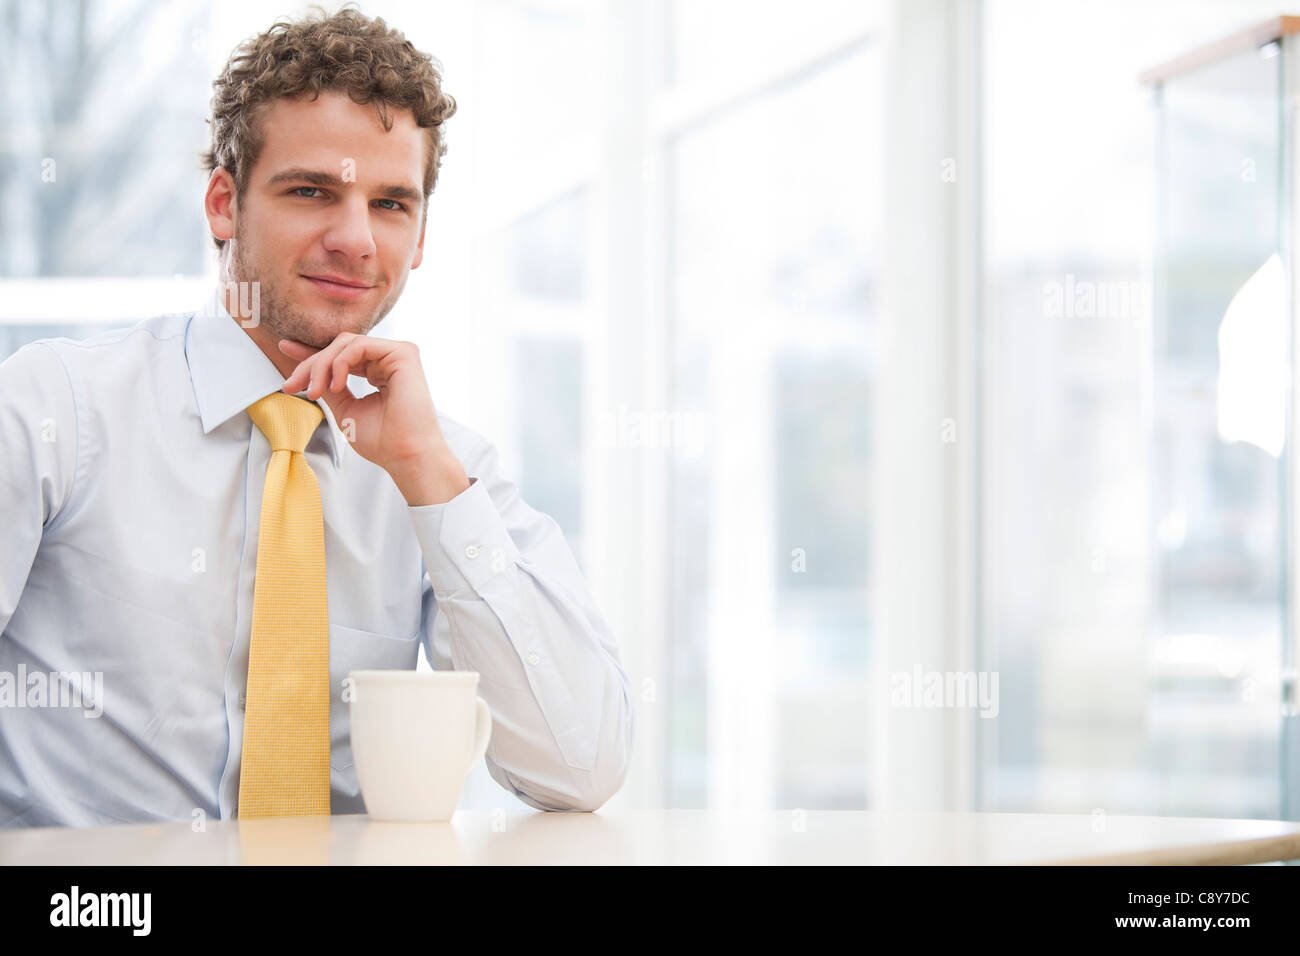 Portrait of young businessman sitting at desk with cup Banque D'Images